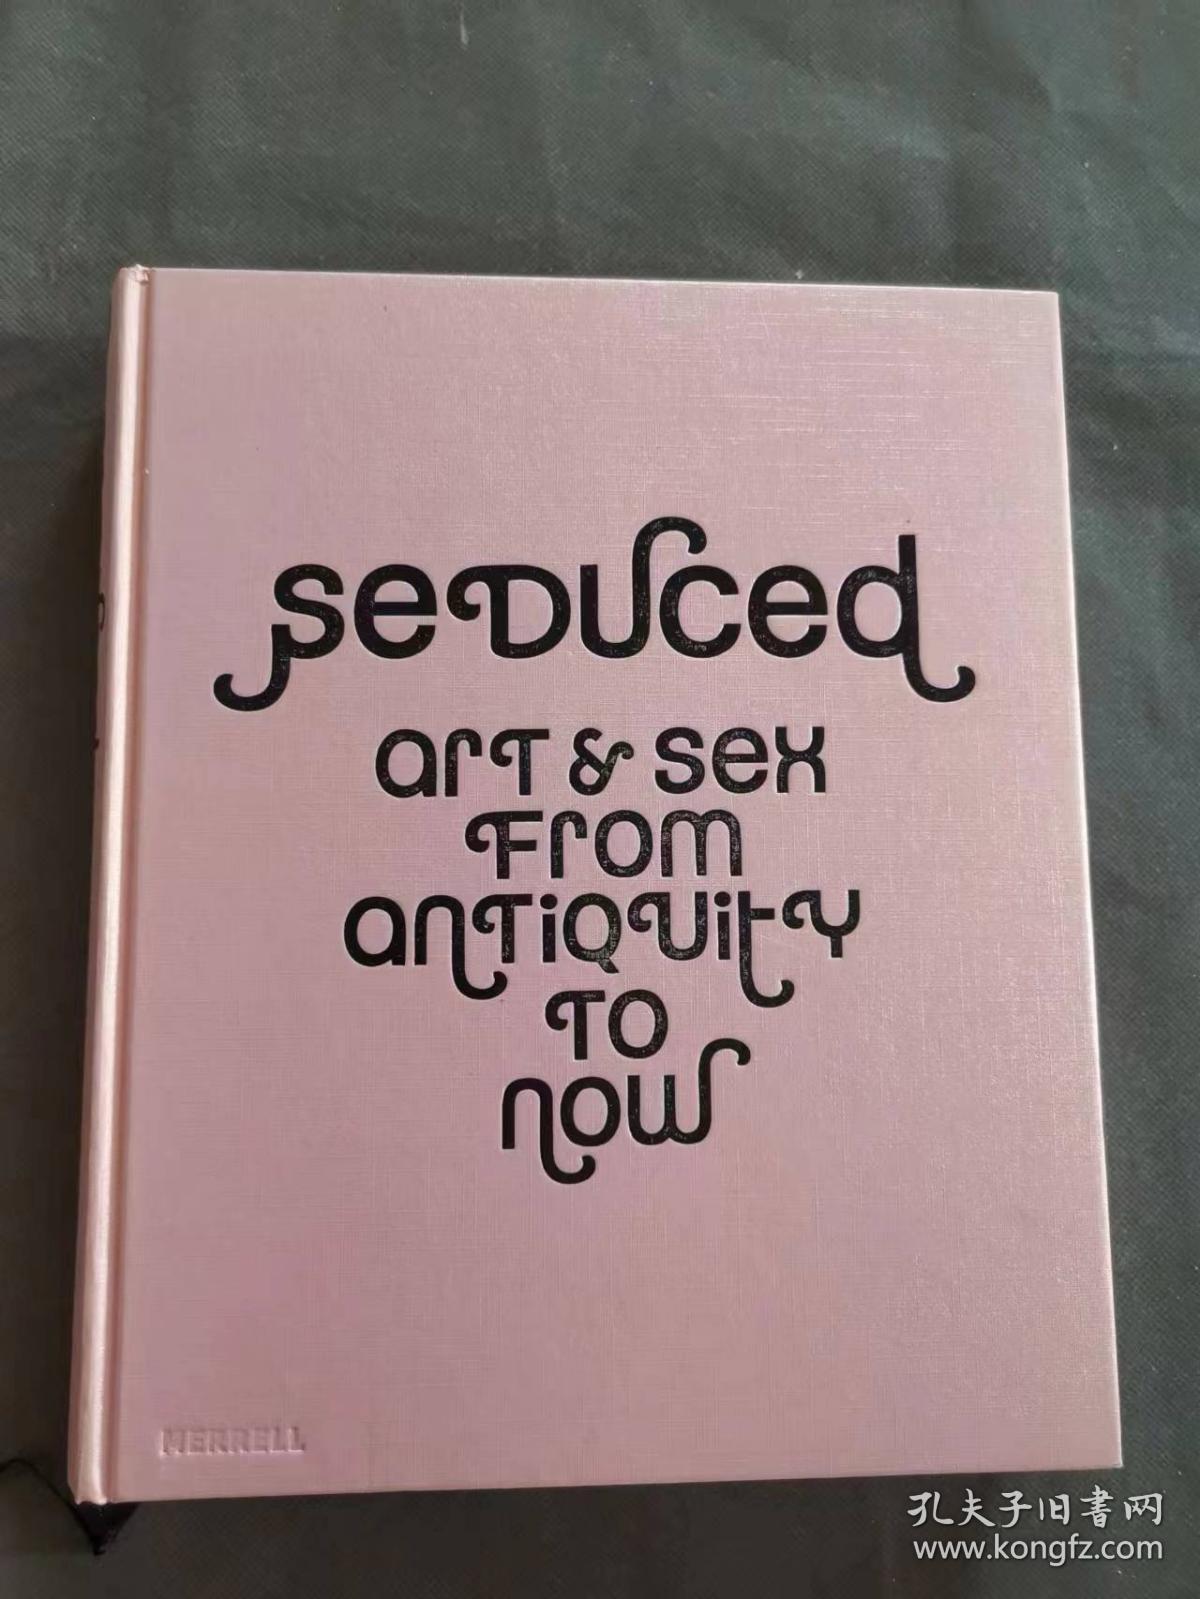 Seduced : Art & Sex from Antiquity to Now 诱惑 情色艺术【彩图版】